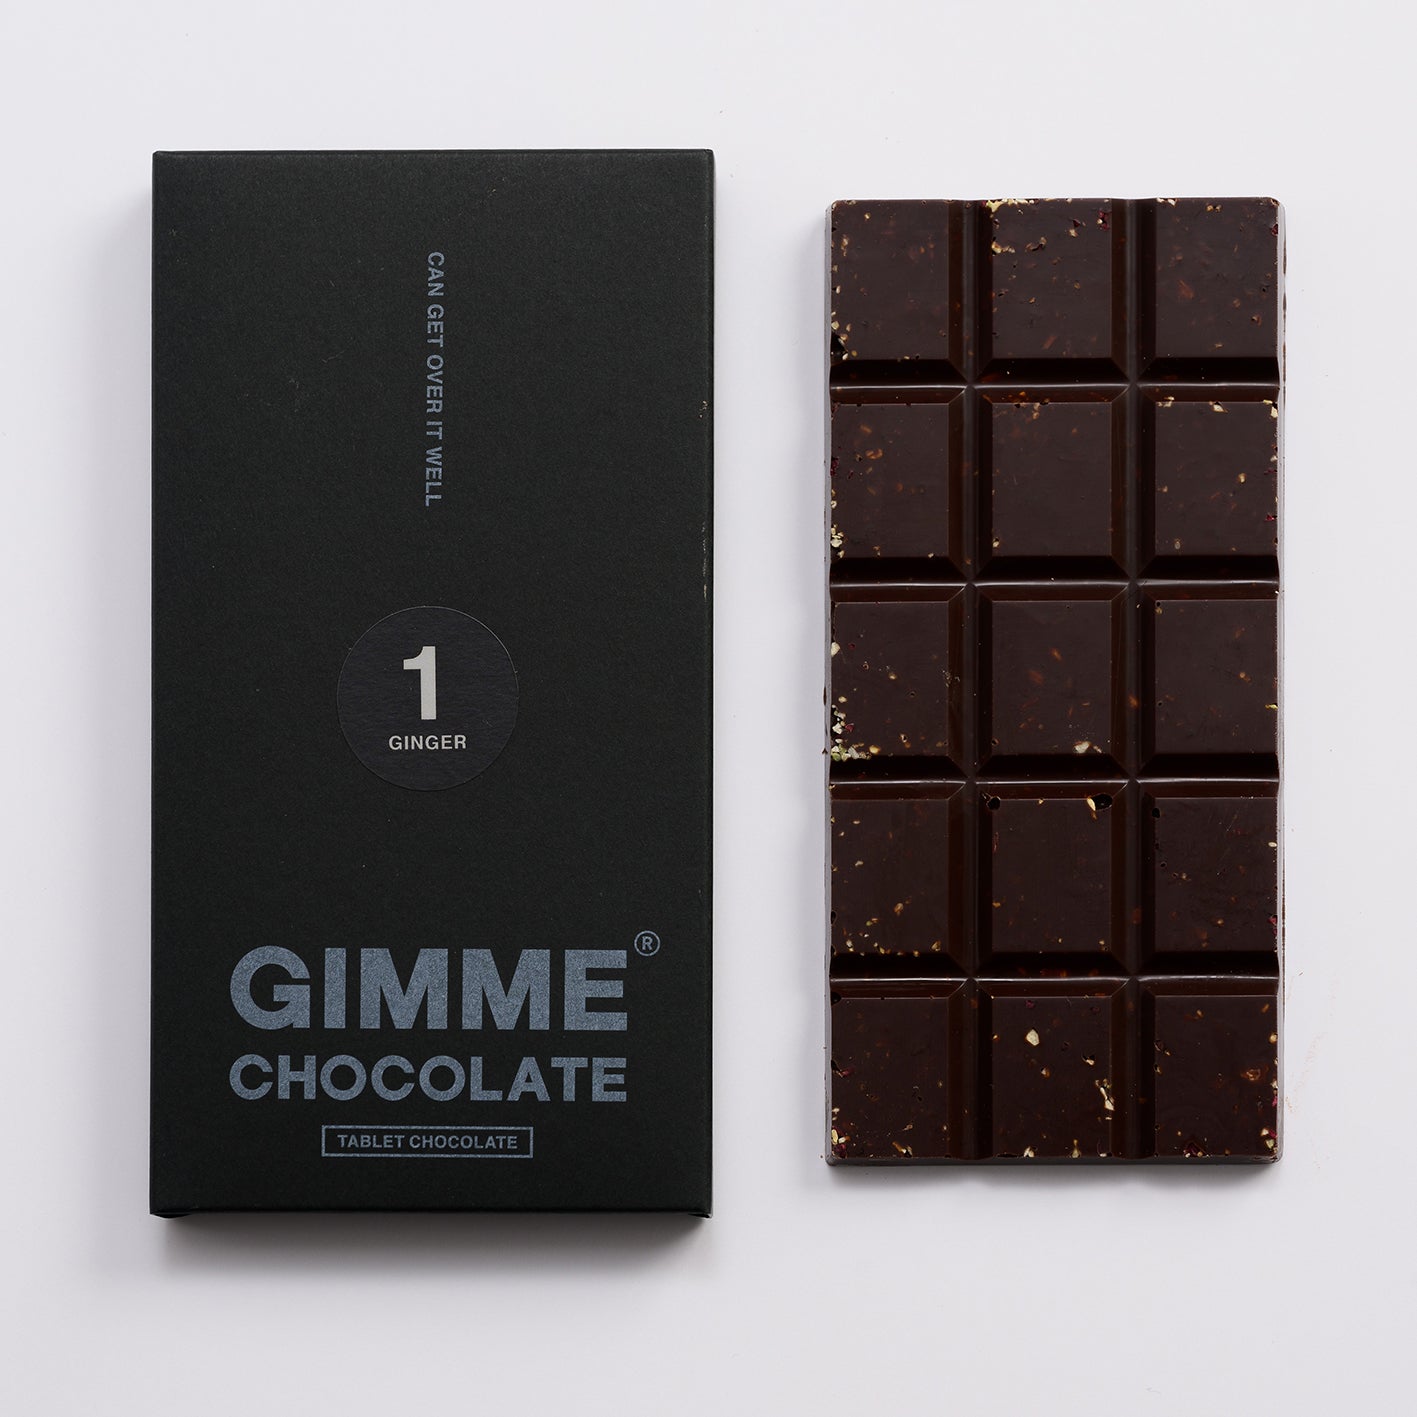 GIMME CHOCOLATE「GINGER」50g